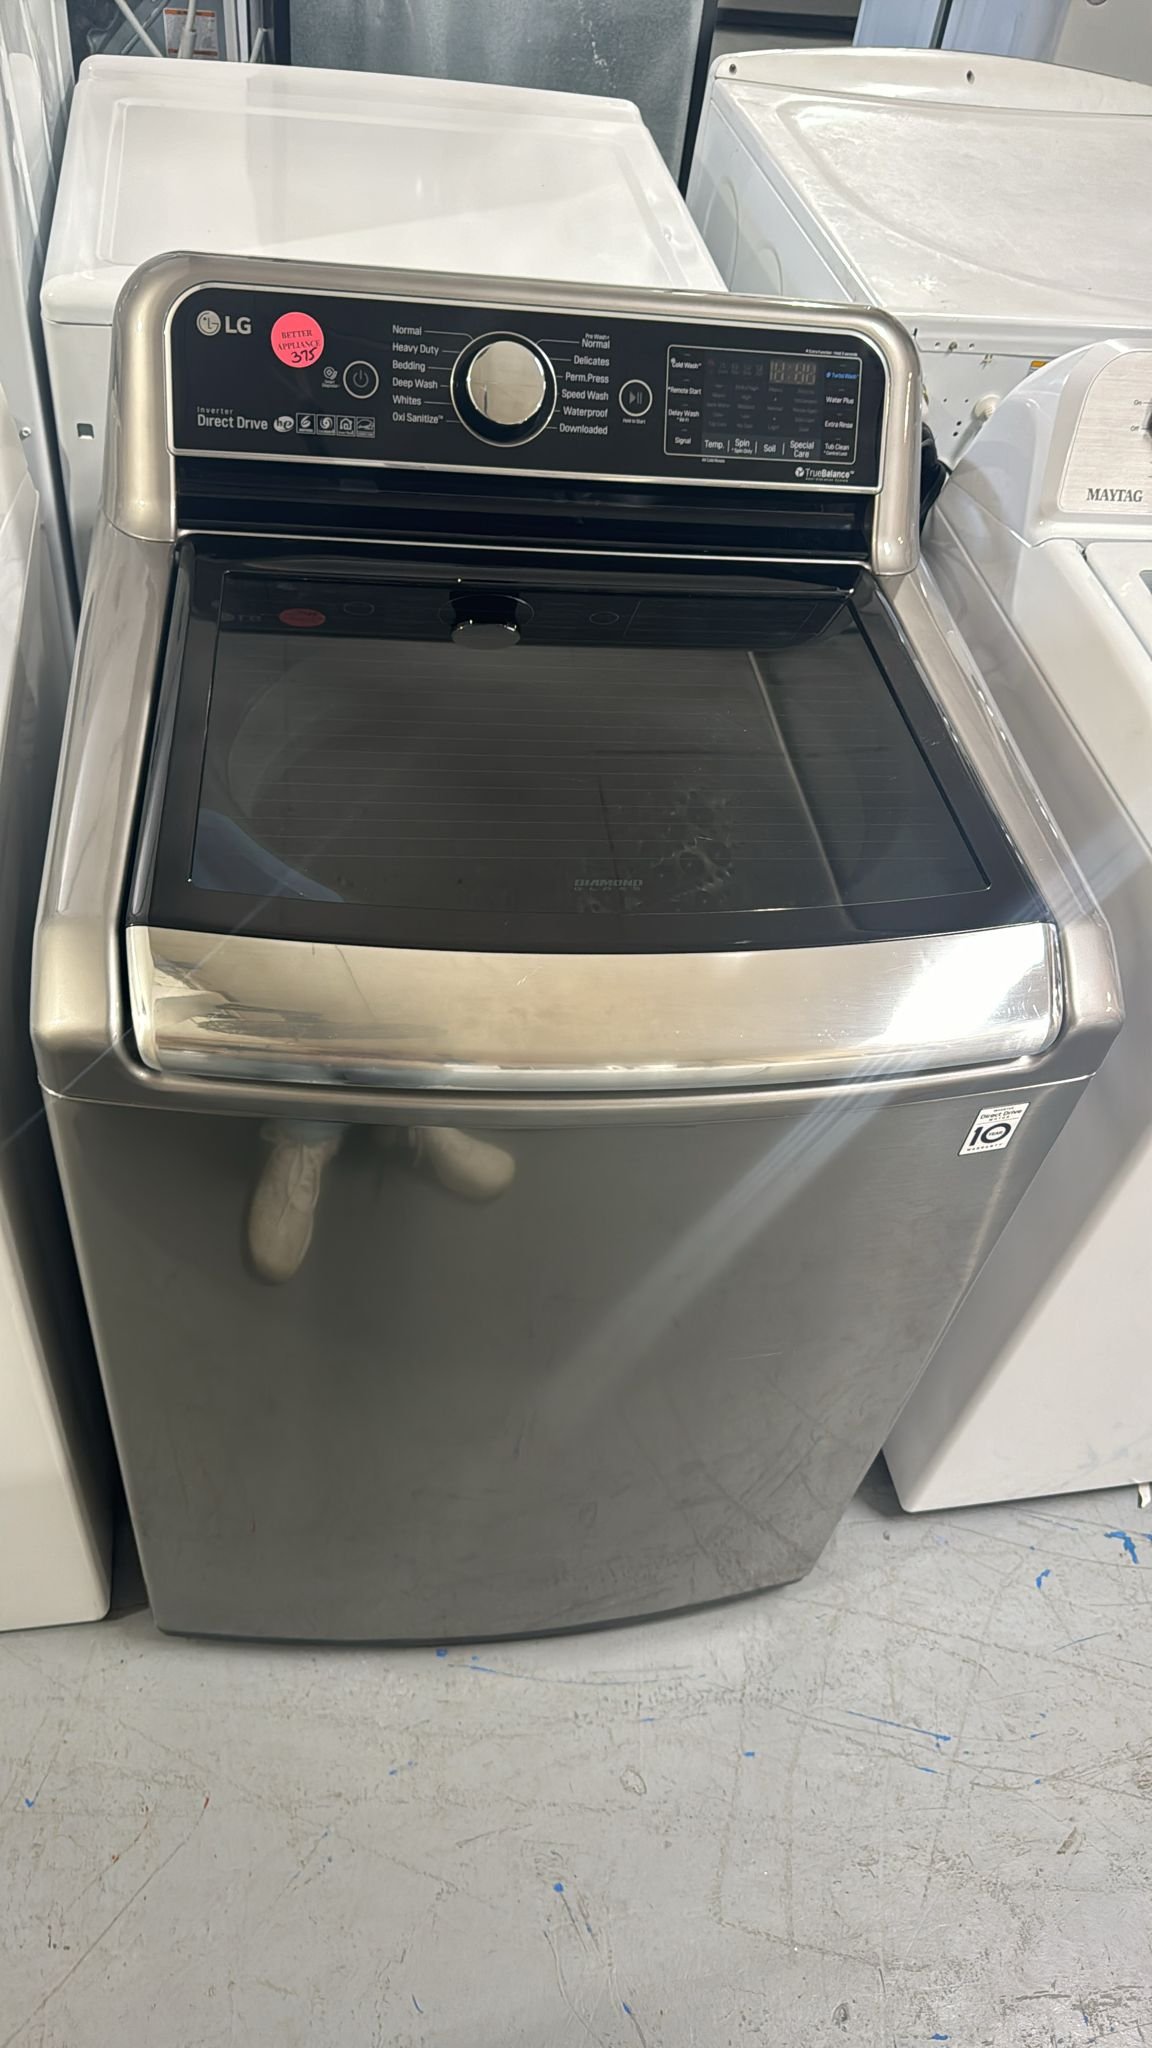 LG Used Top Load Washer